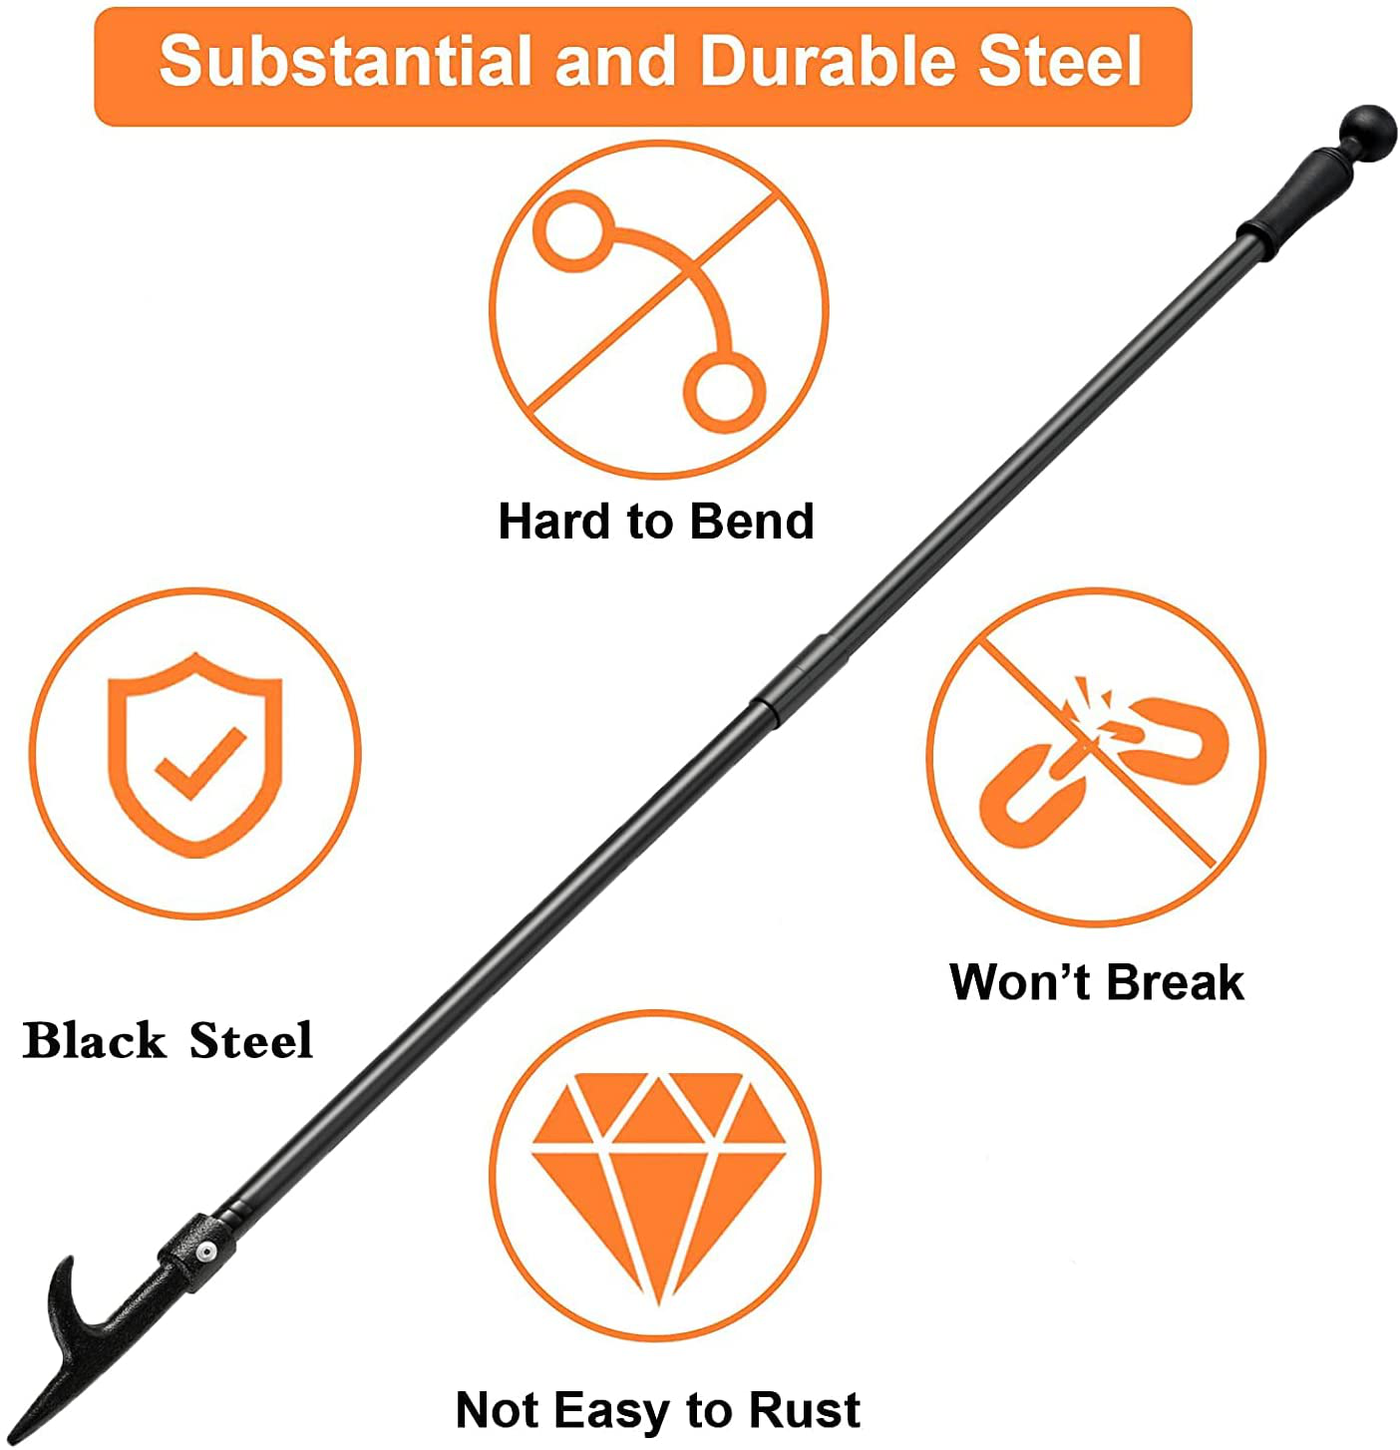 BsBsBest Fire Poker for Fire Pit, 46 Inch Extra Long Portable Campfire Poker for Fireplace, Camping, Wood Stove, Outdoor and Indoor Use, Rust Resistant Stainless Steel Silver Finish